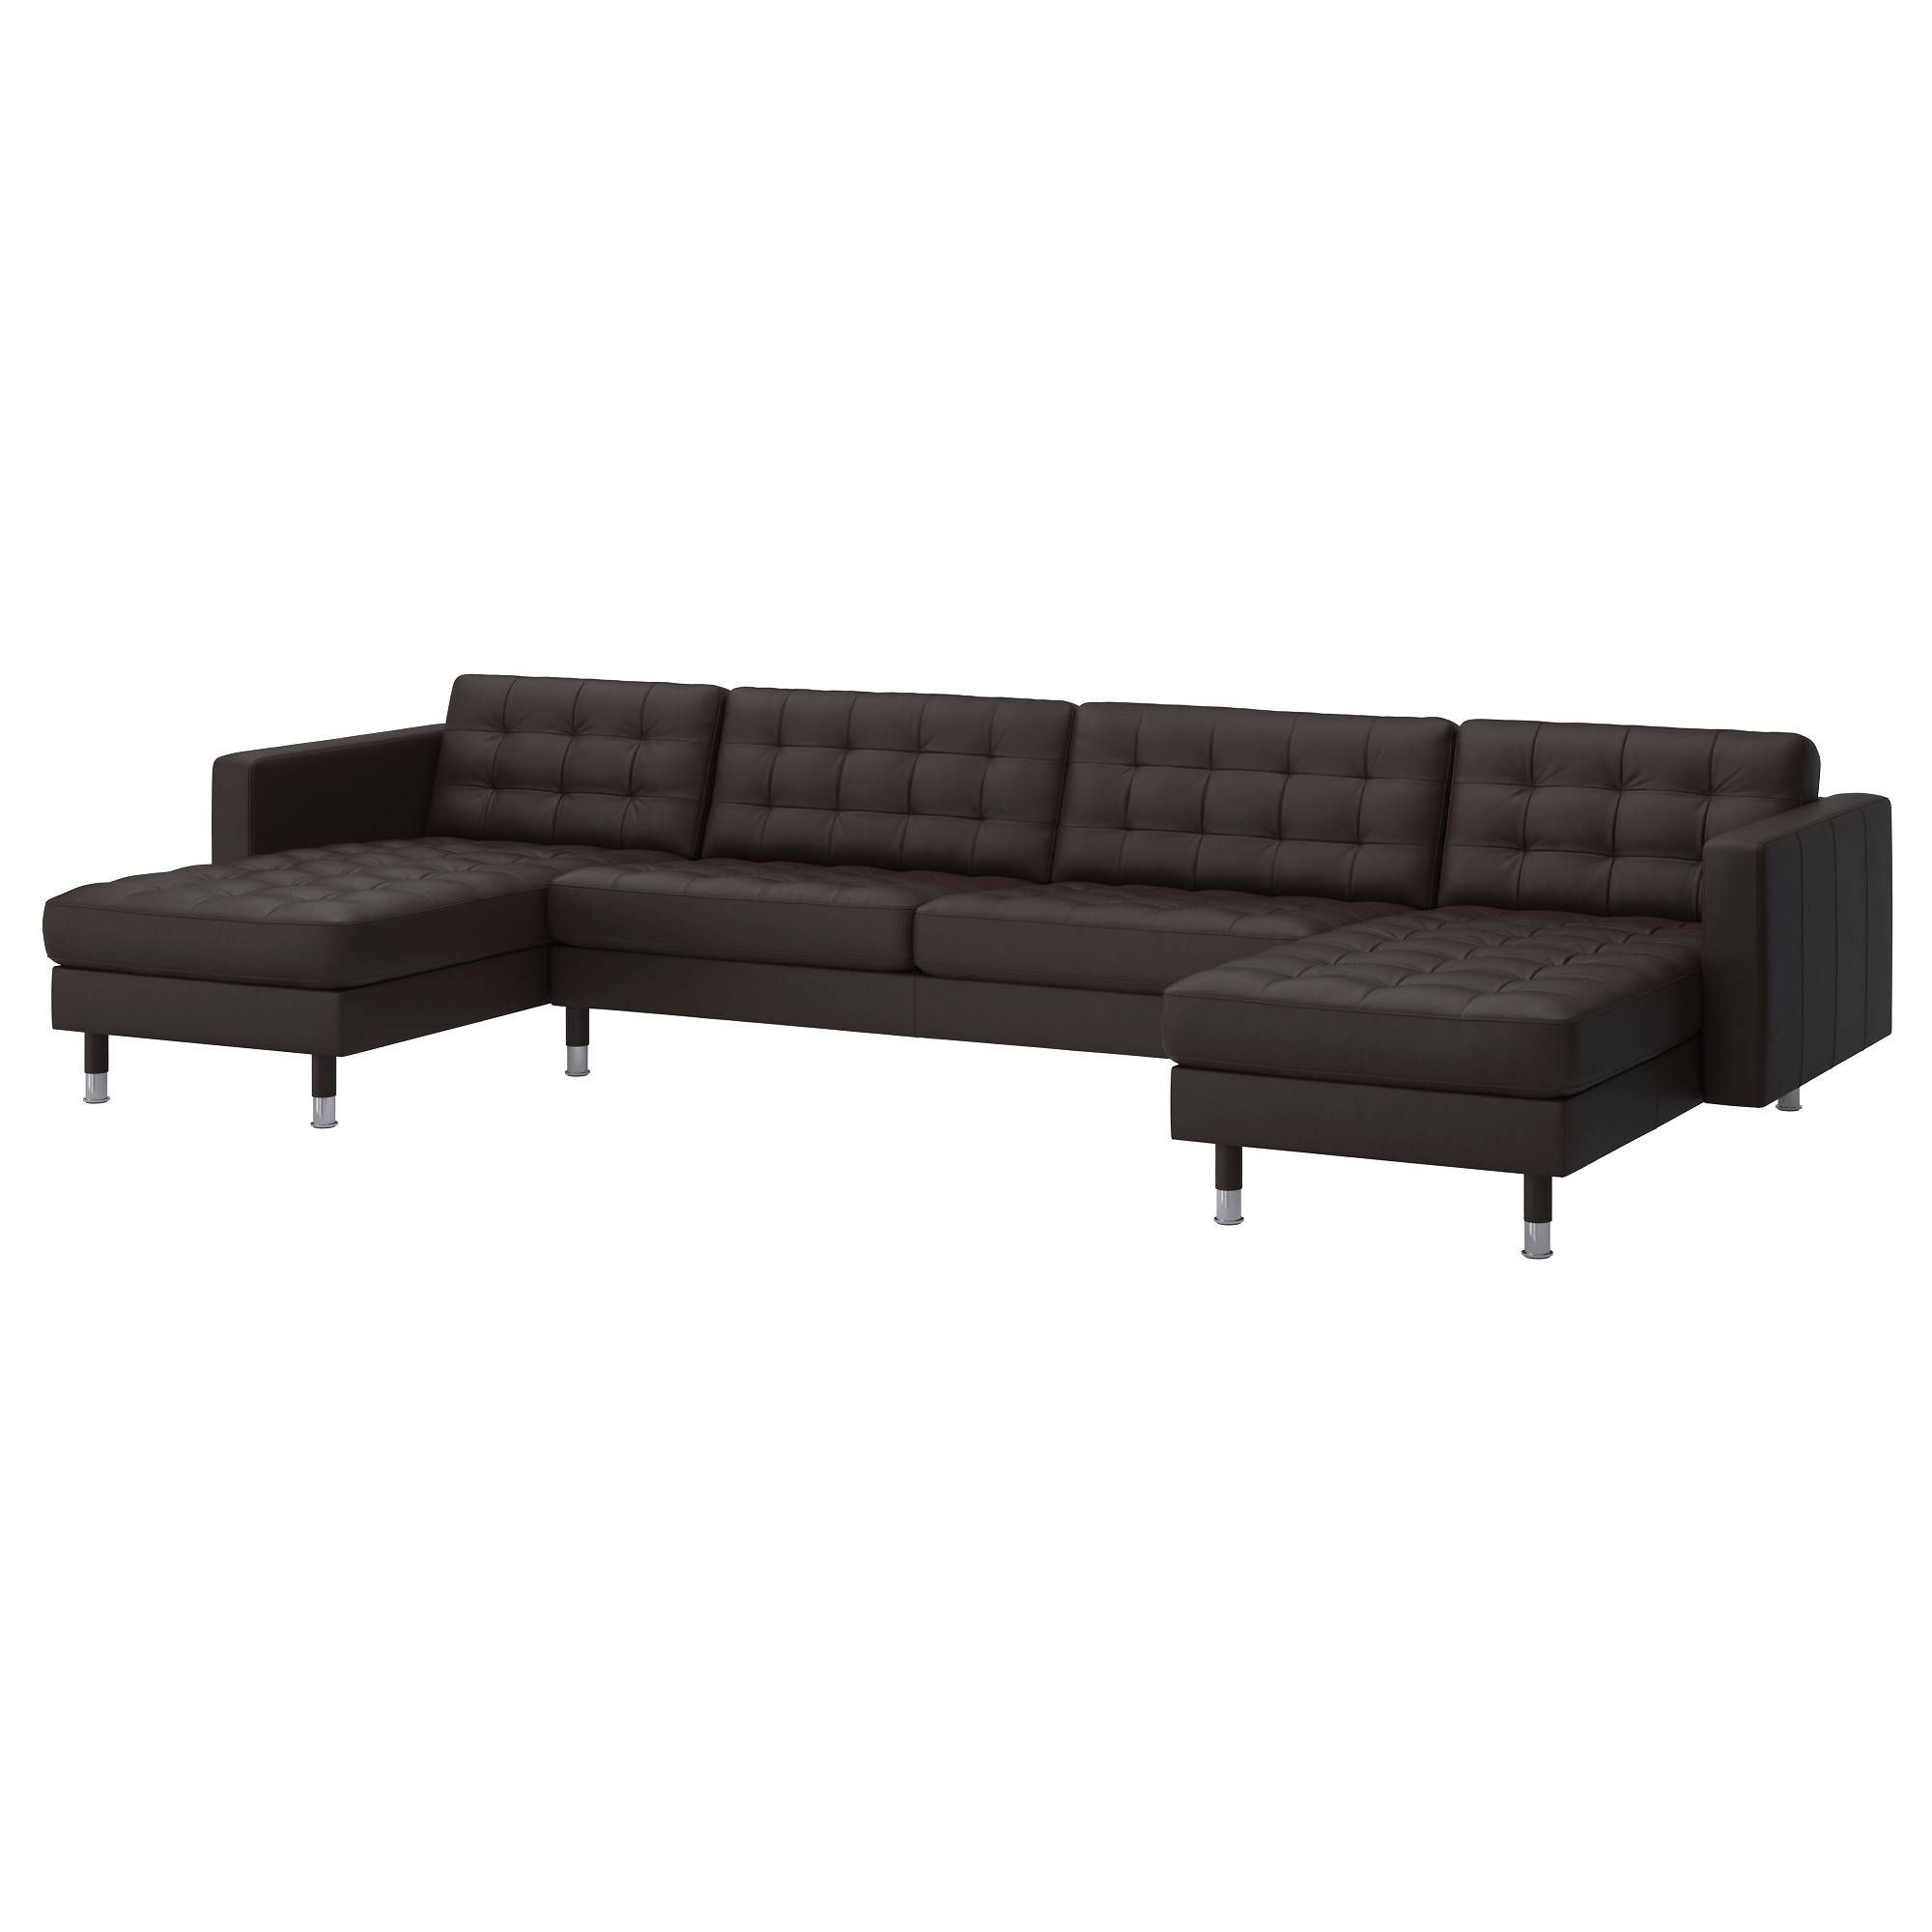 Sectional Sofas & Couches – Ikea Regarding Backless Sectional Sofa (View 15 of 30)